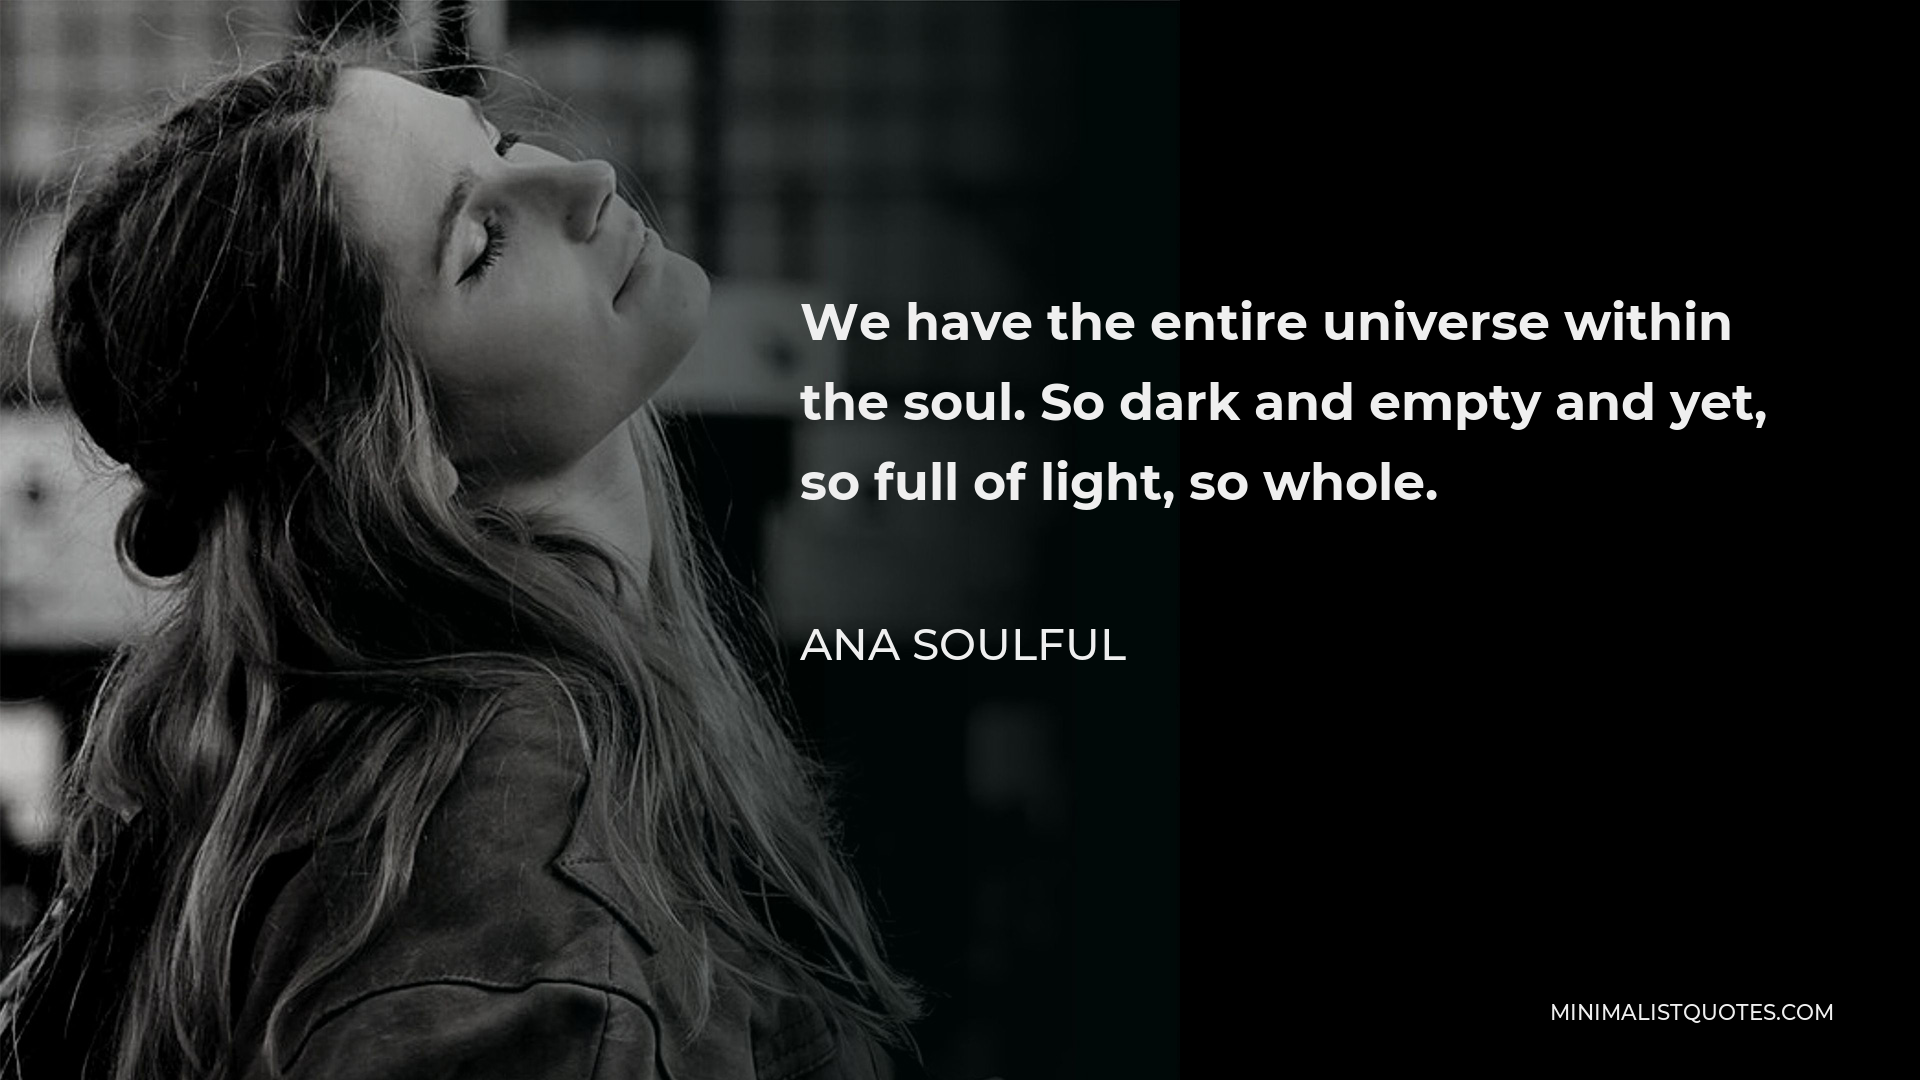 Ana Soulful Quote - We have the entire universe within the soul. So dark and empty and yet, so full of light, so whole.